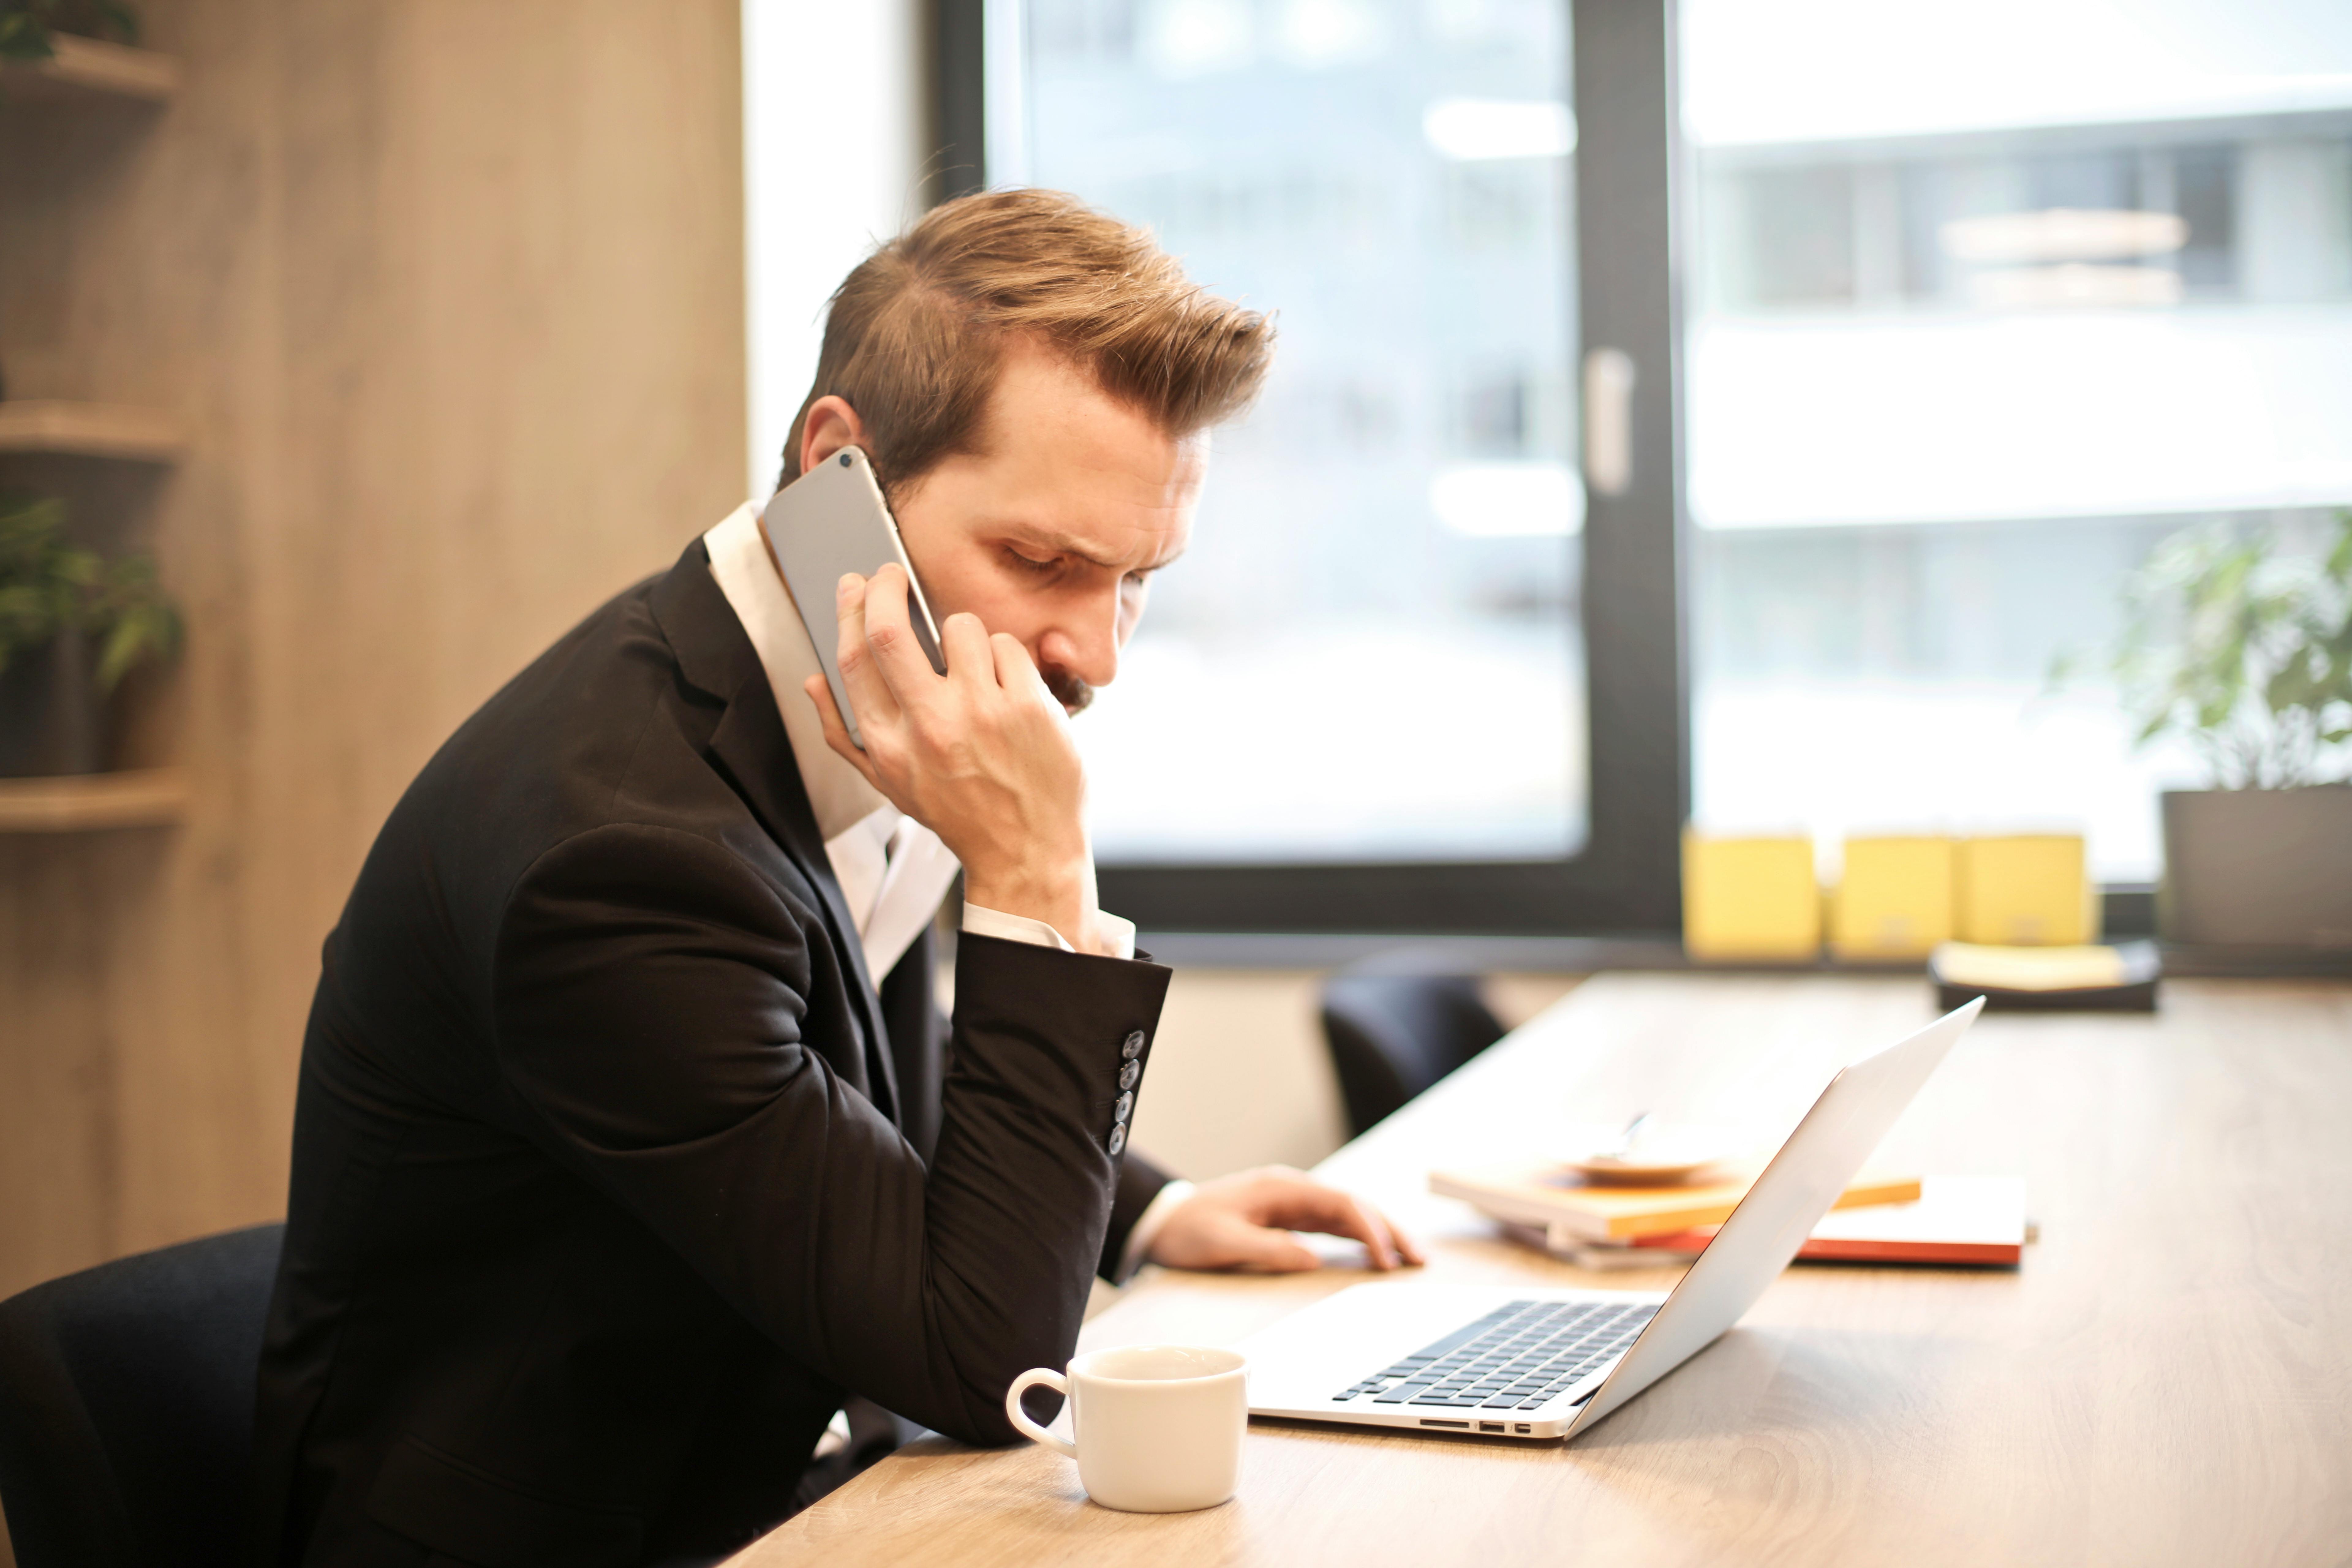 An annoyed man on a call | Source: Pexels